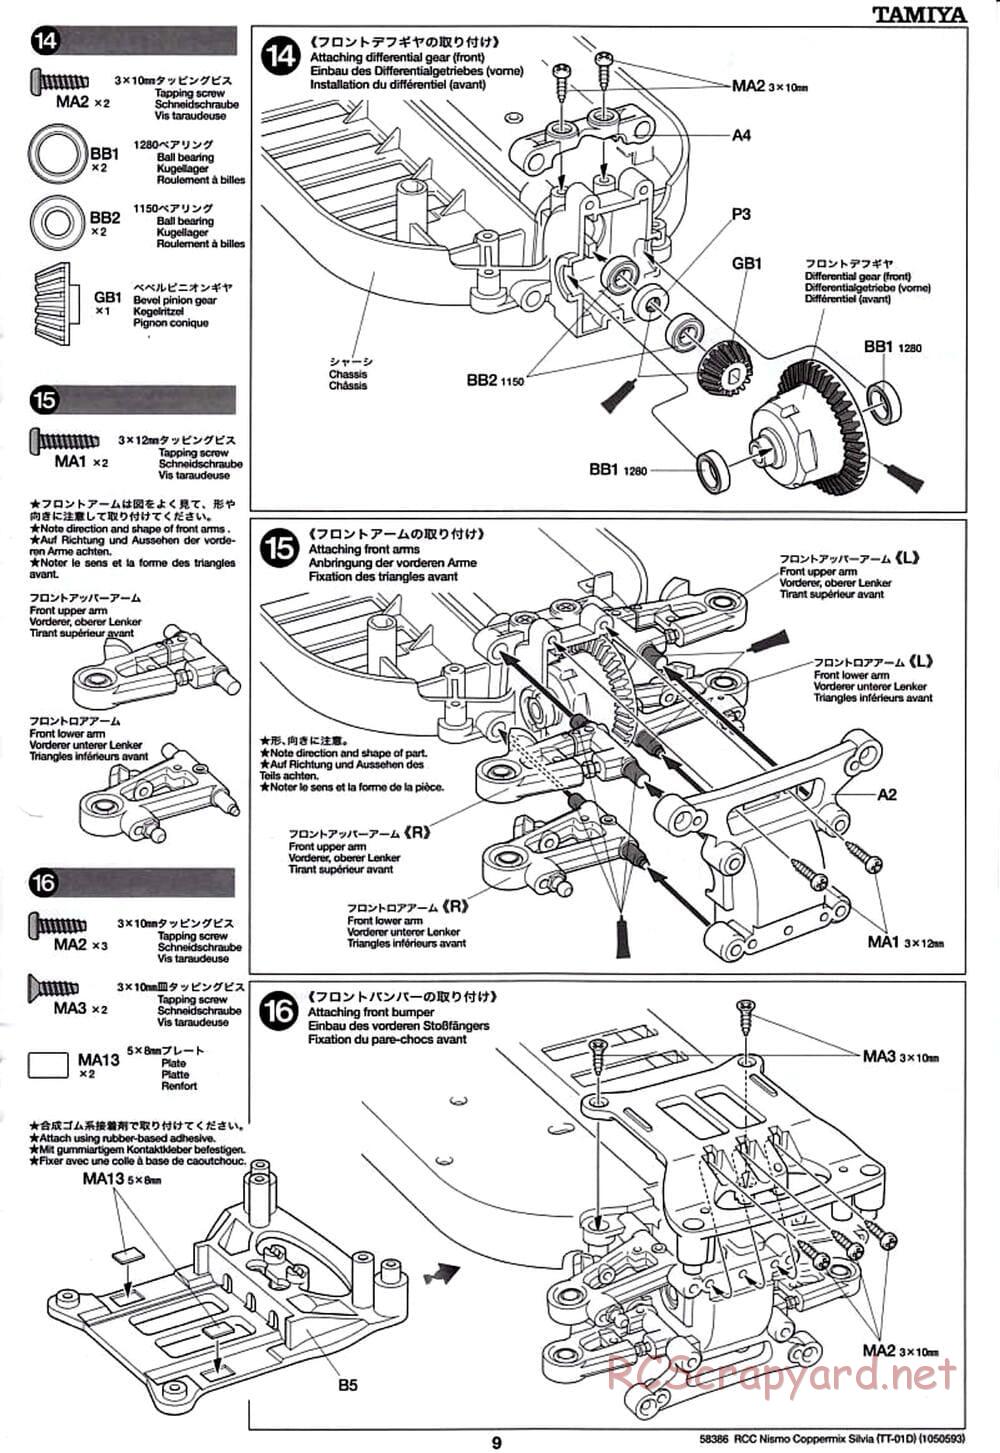 Tamiya - Nismo Coppermix Silvia Drift Spec - TT-01D Chassis - Manual - Page 9